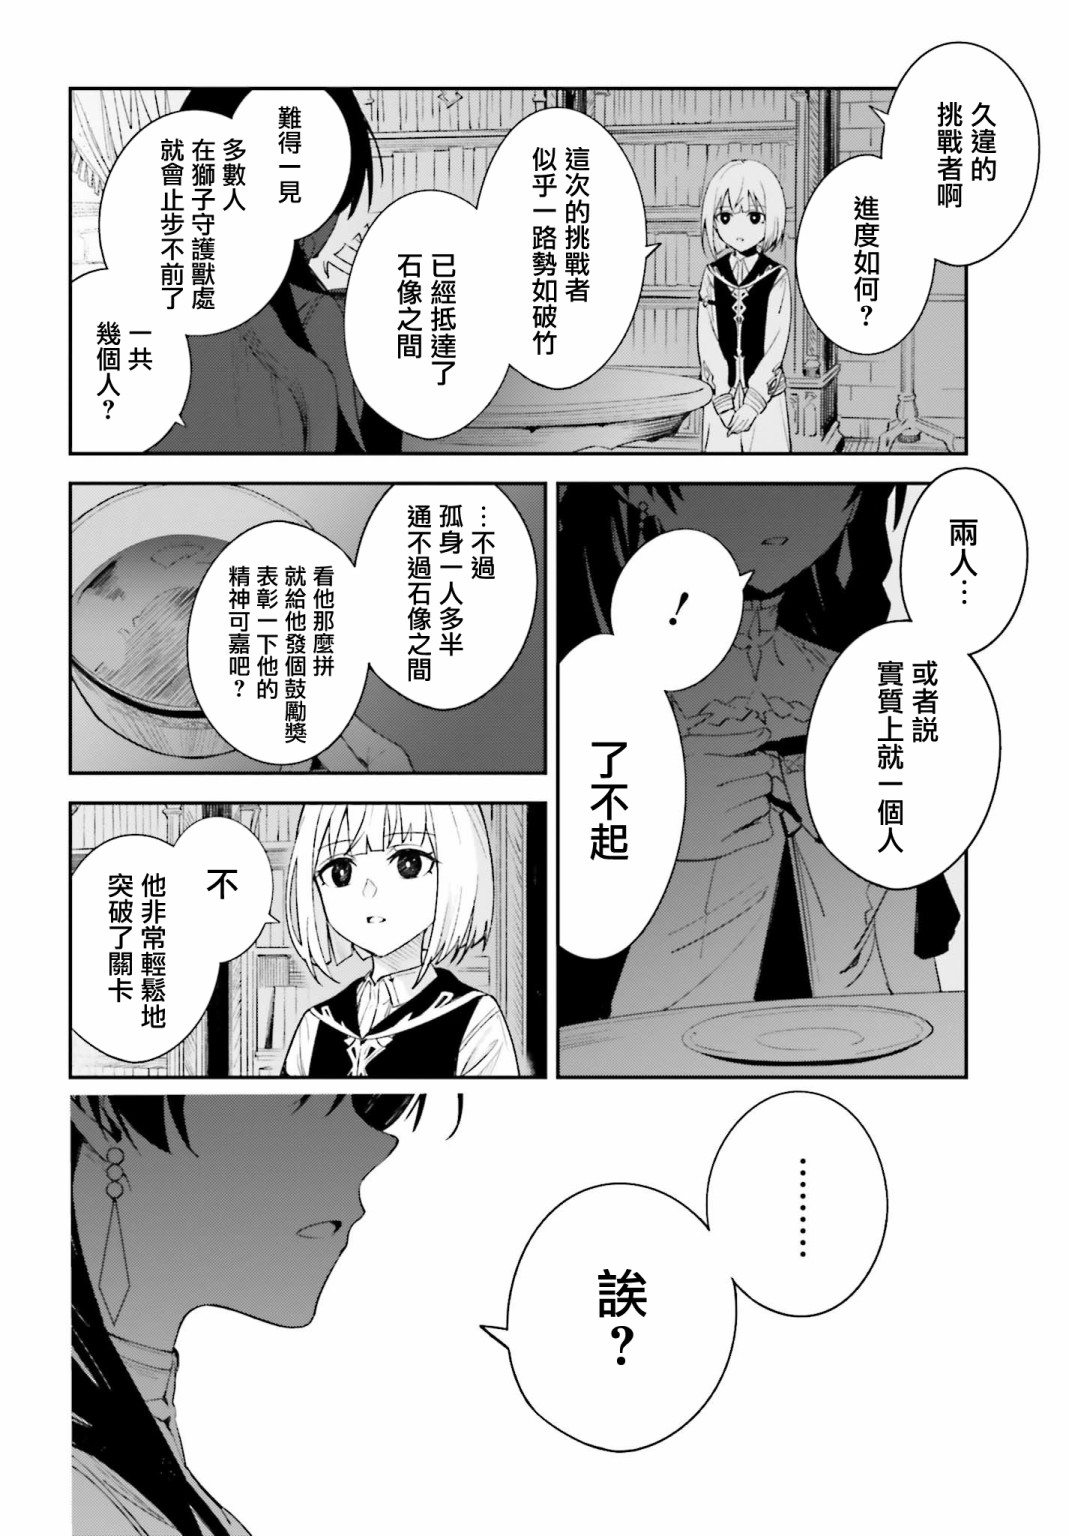 Unnamed Memory - 第01話(1/2) - 2